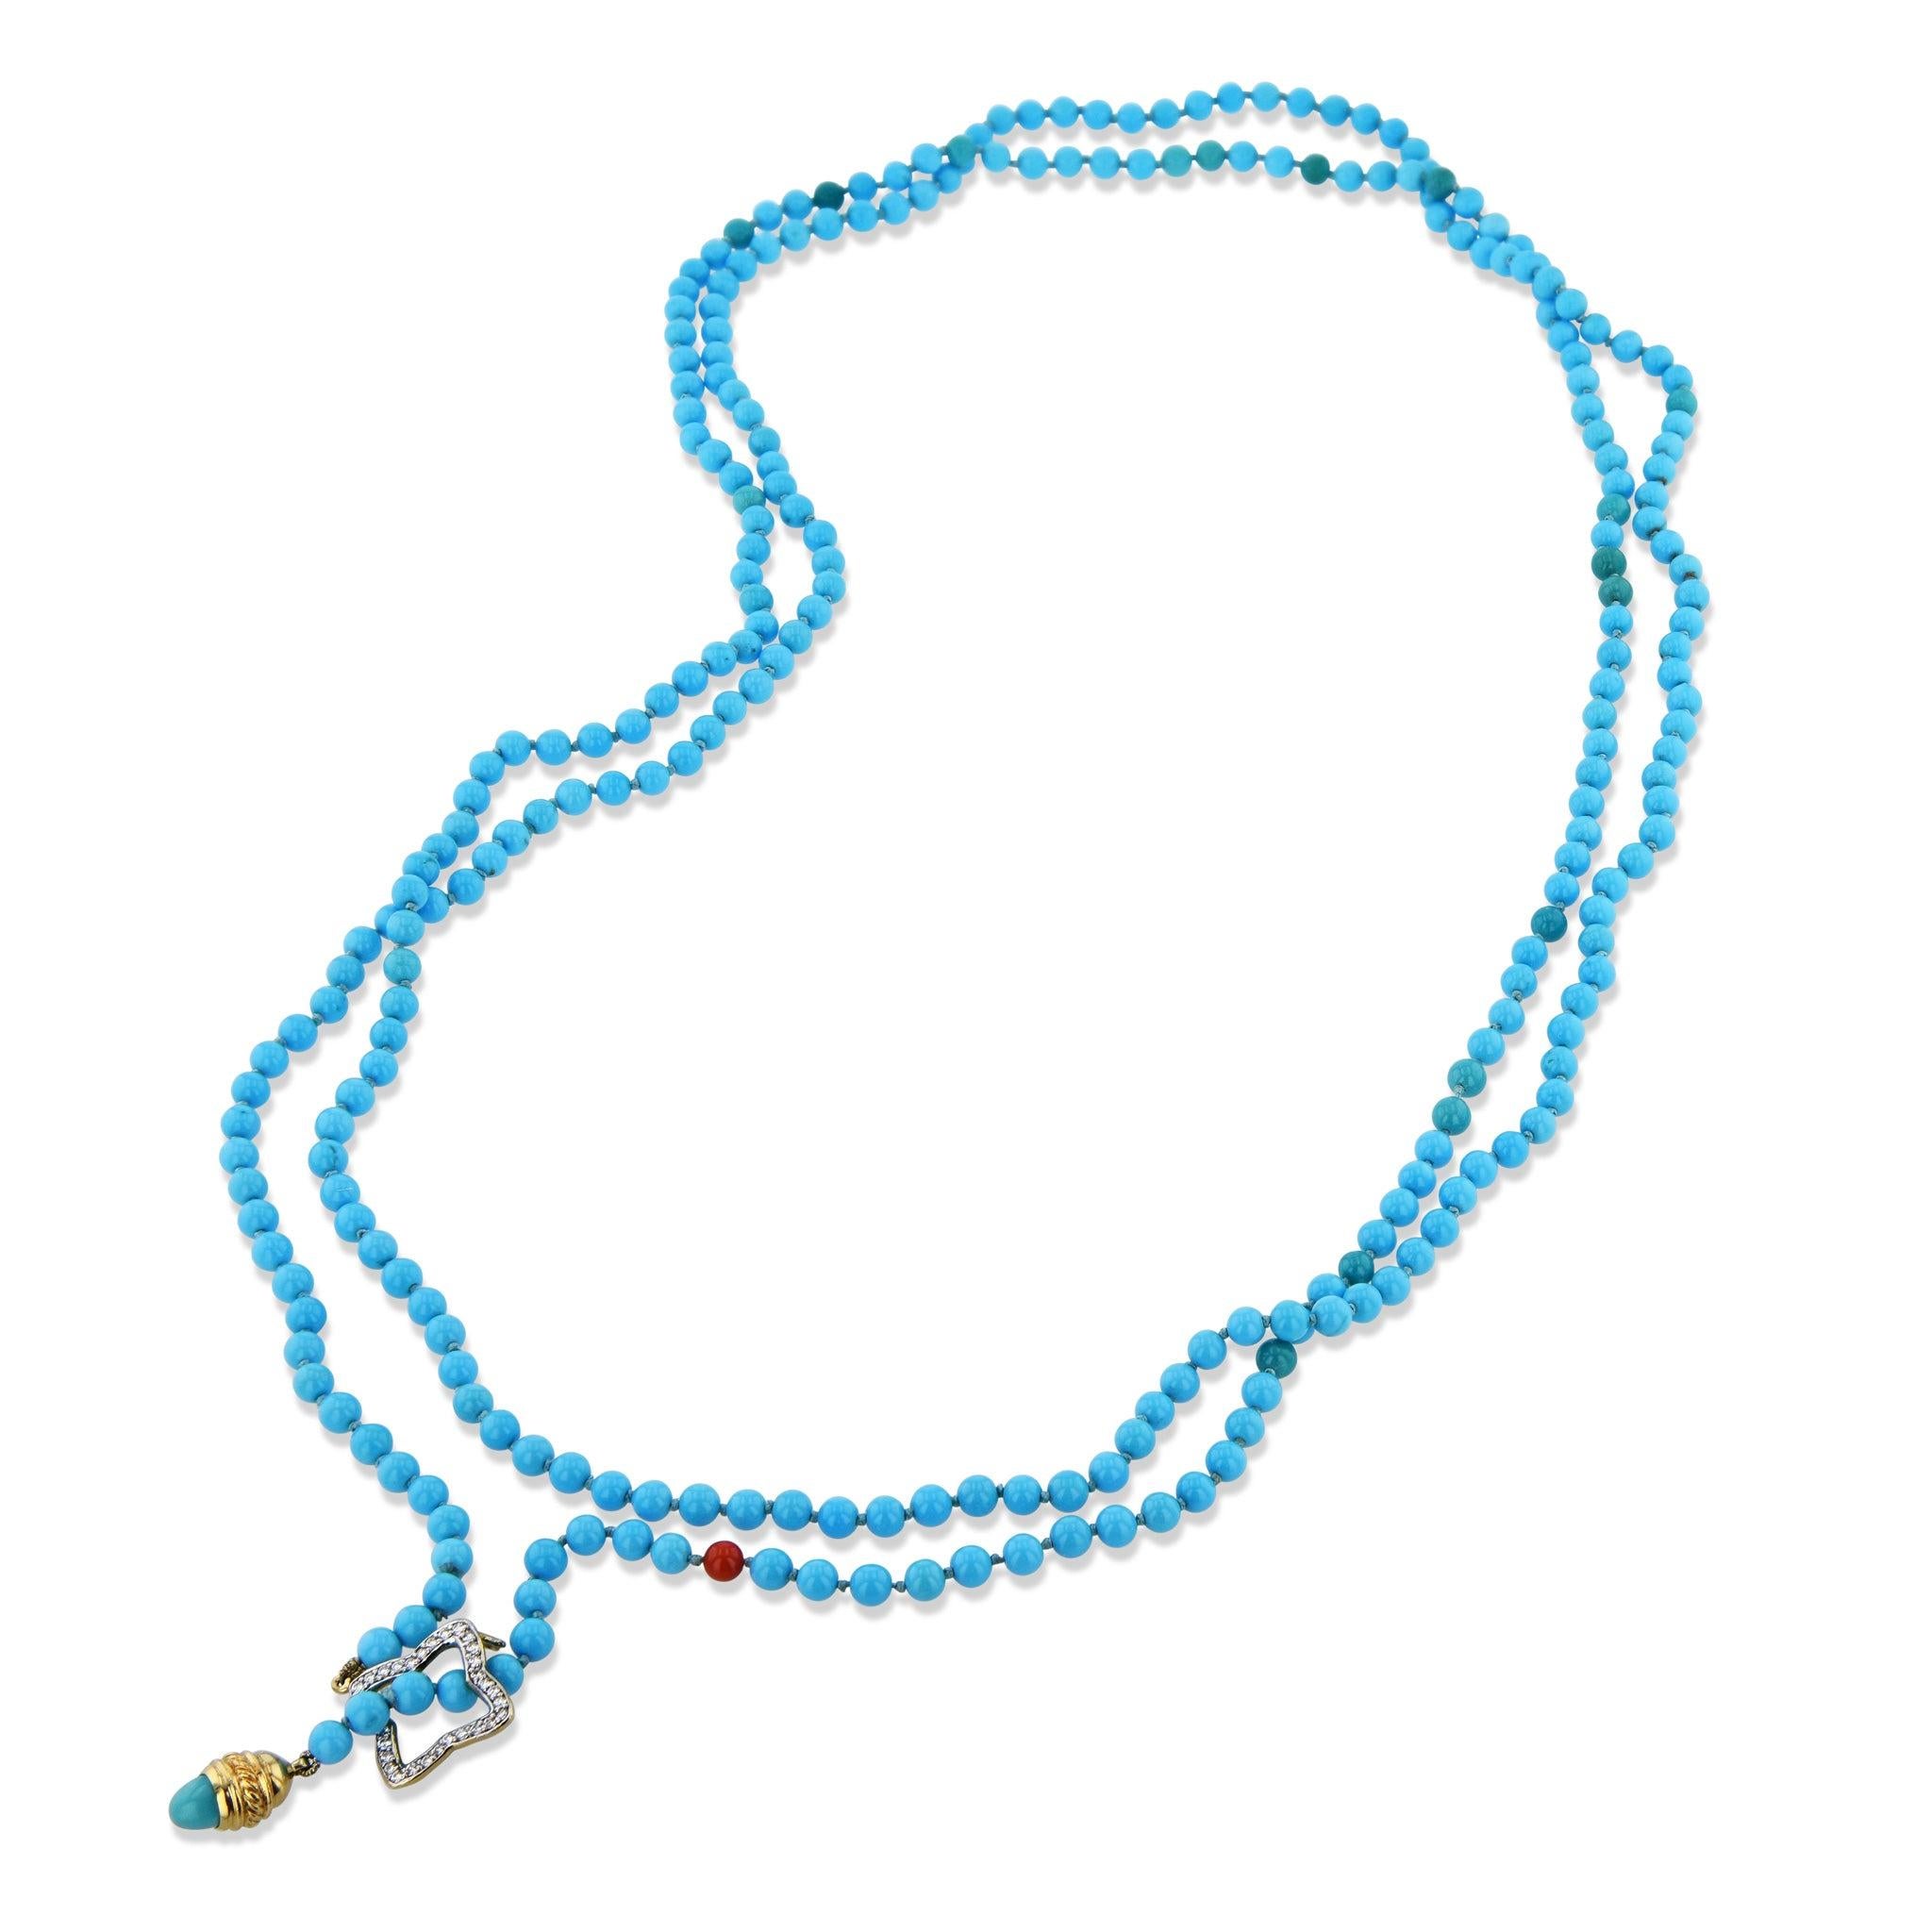 Discover the exquisite beauty of David Yurman's Turquoise Lariat Estate Necklace. Boasting 4mm Turquoise beads and a shimmering 